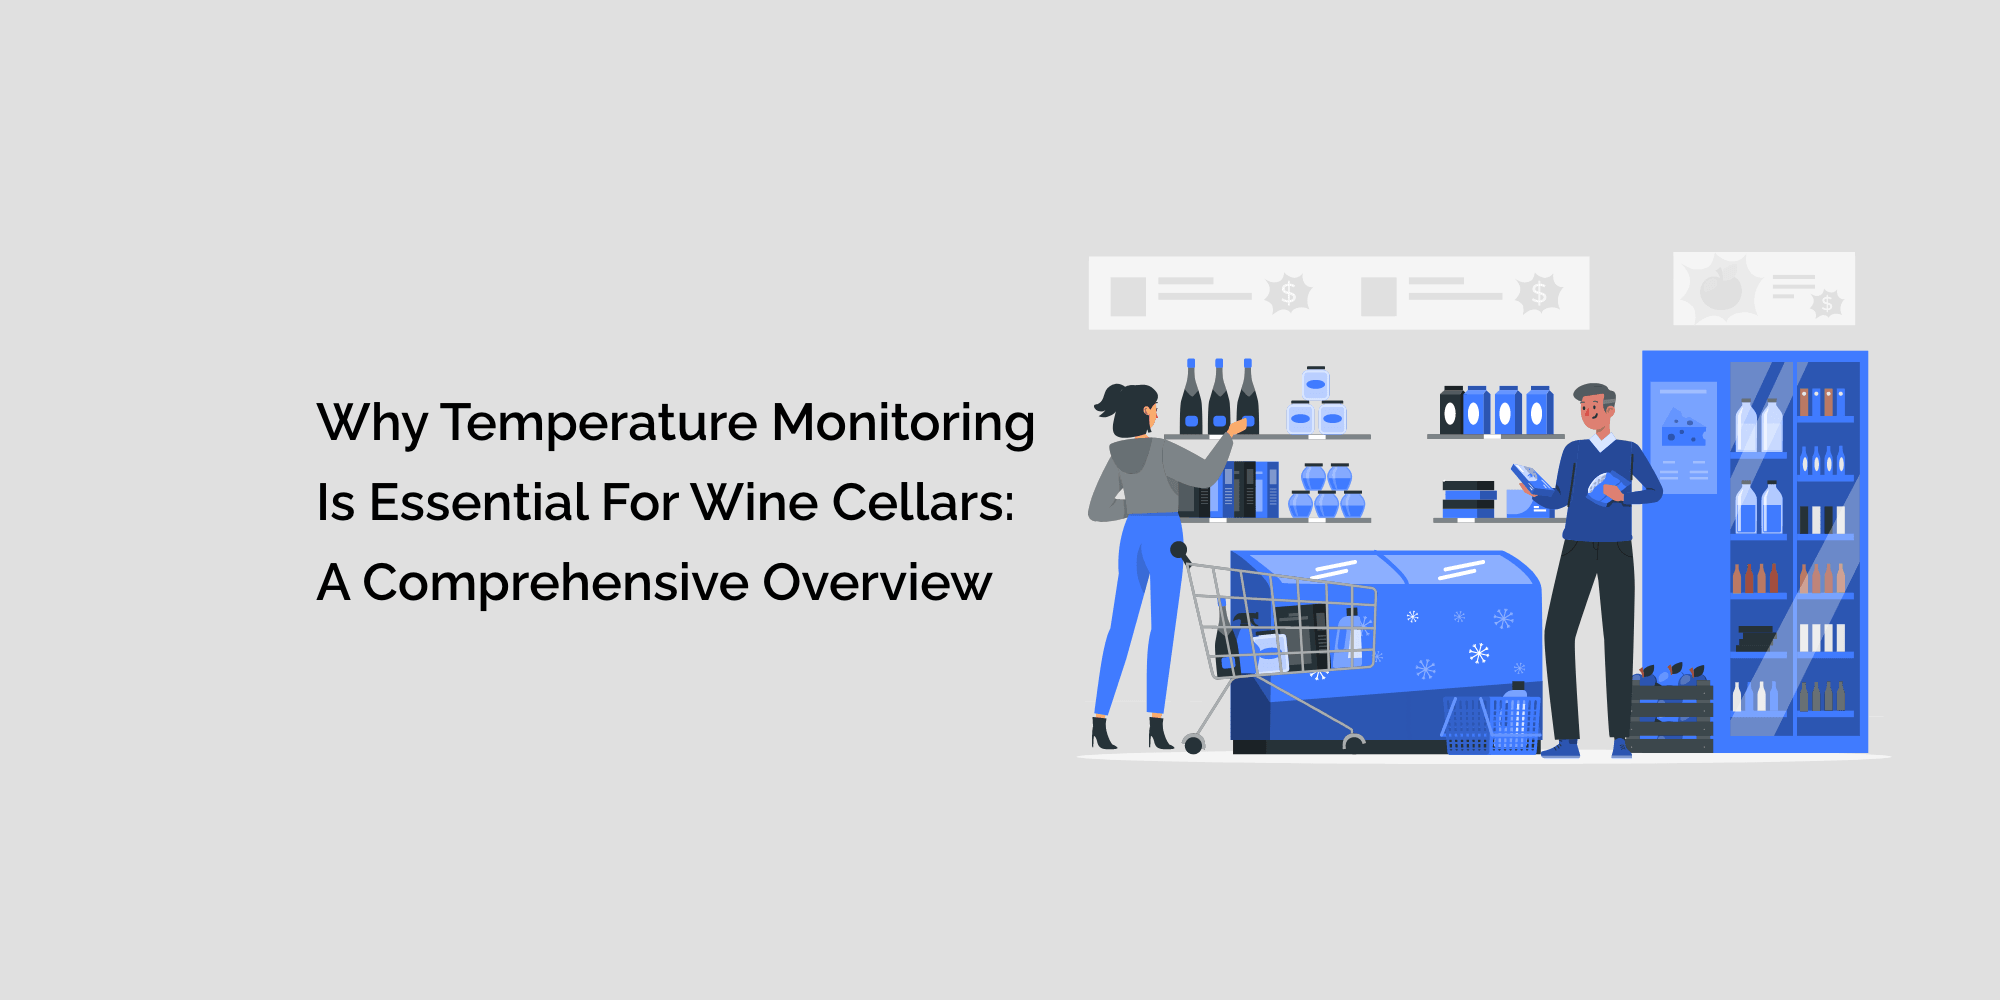 Why Temperature Monitoring is Essential for Wine Cellars: A Comprehensive Overview